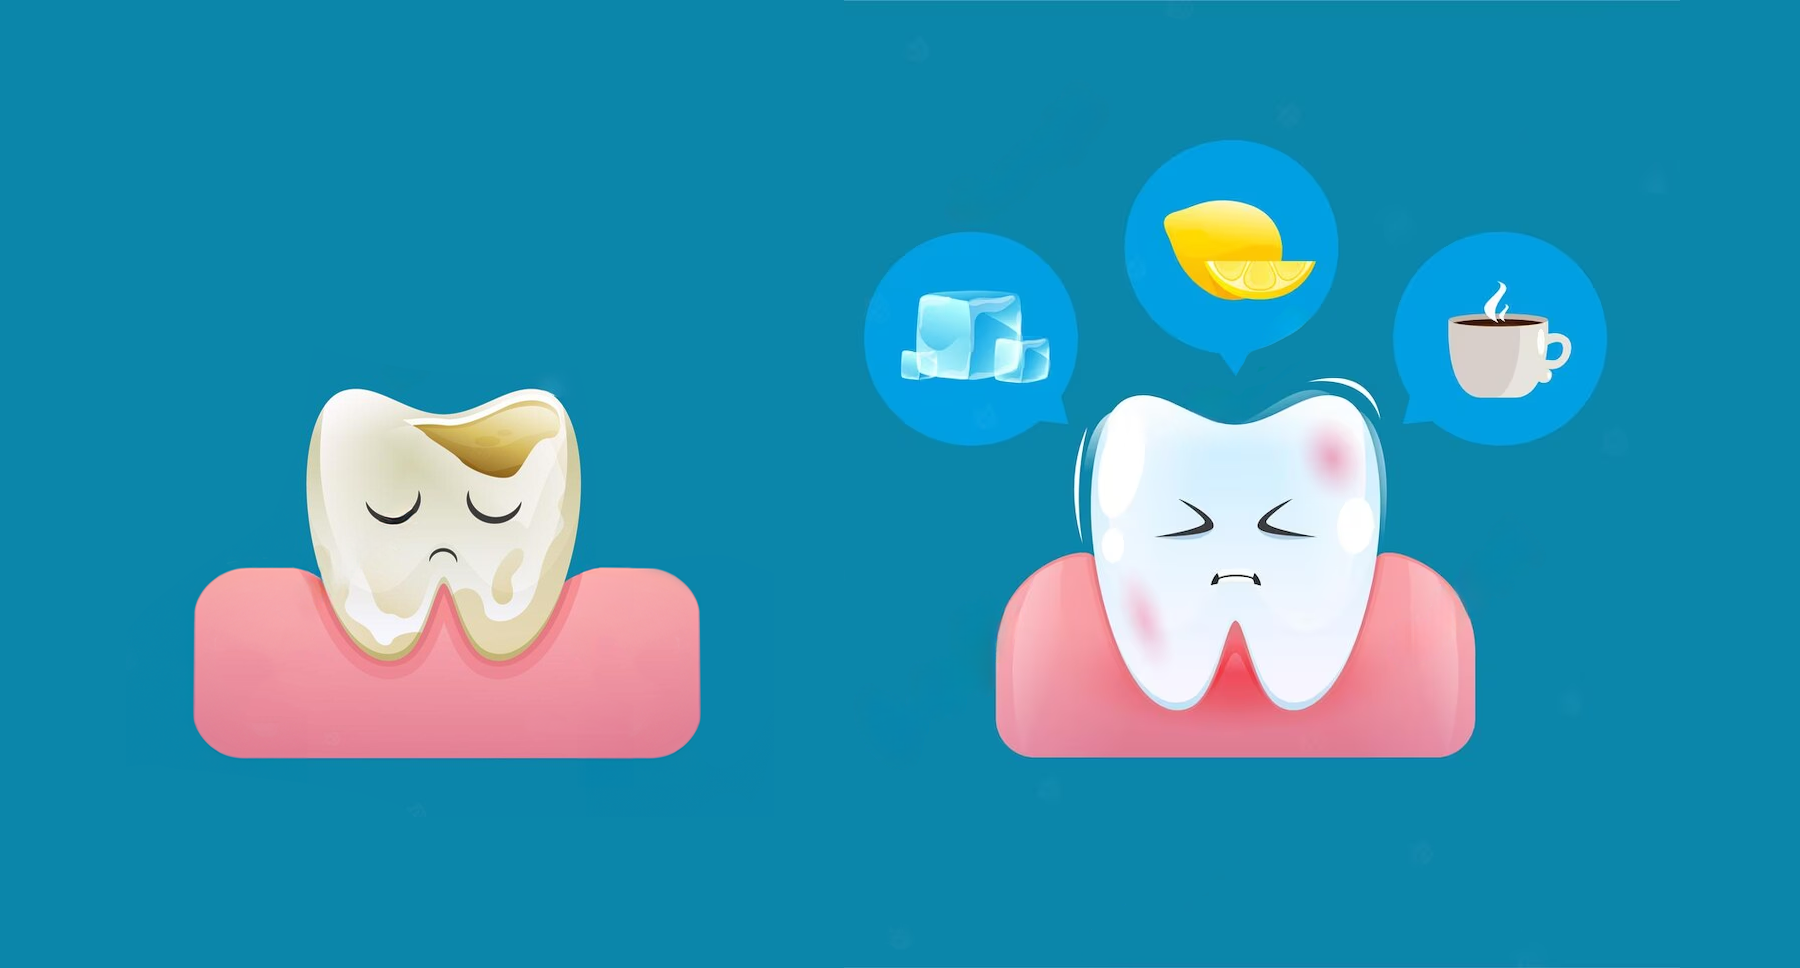 An illustration showing a healthy but sensitive tooth affected by lemon, coffee, and ice, contrasted with a yellow and broken unhealthy tooth.